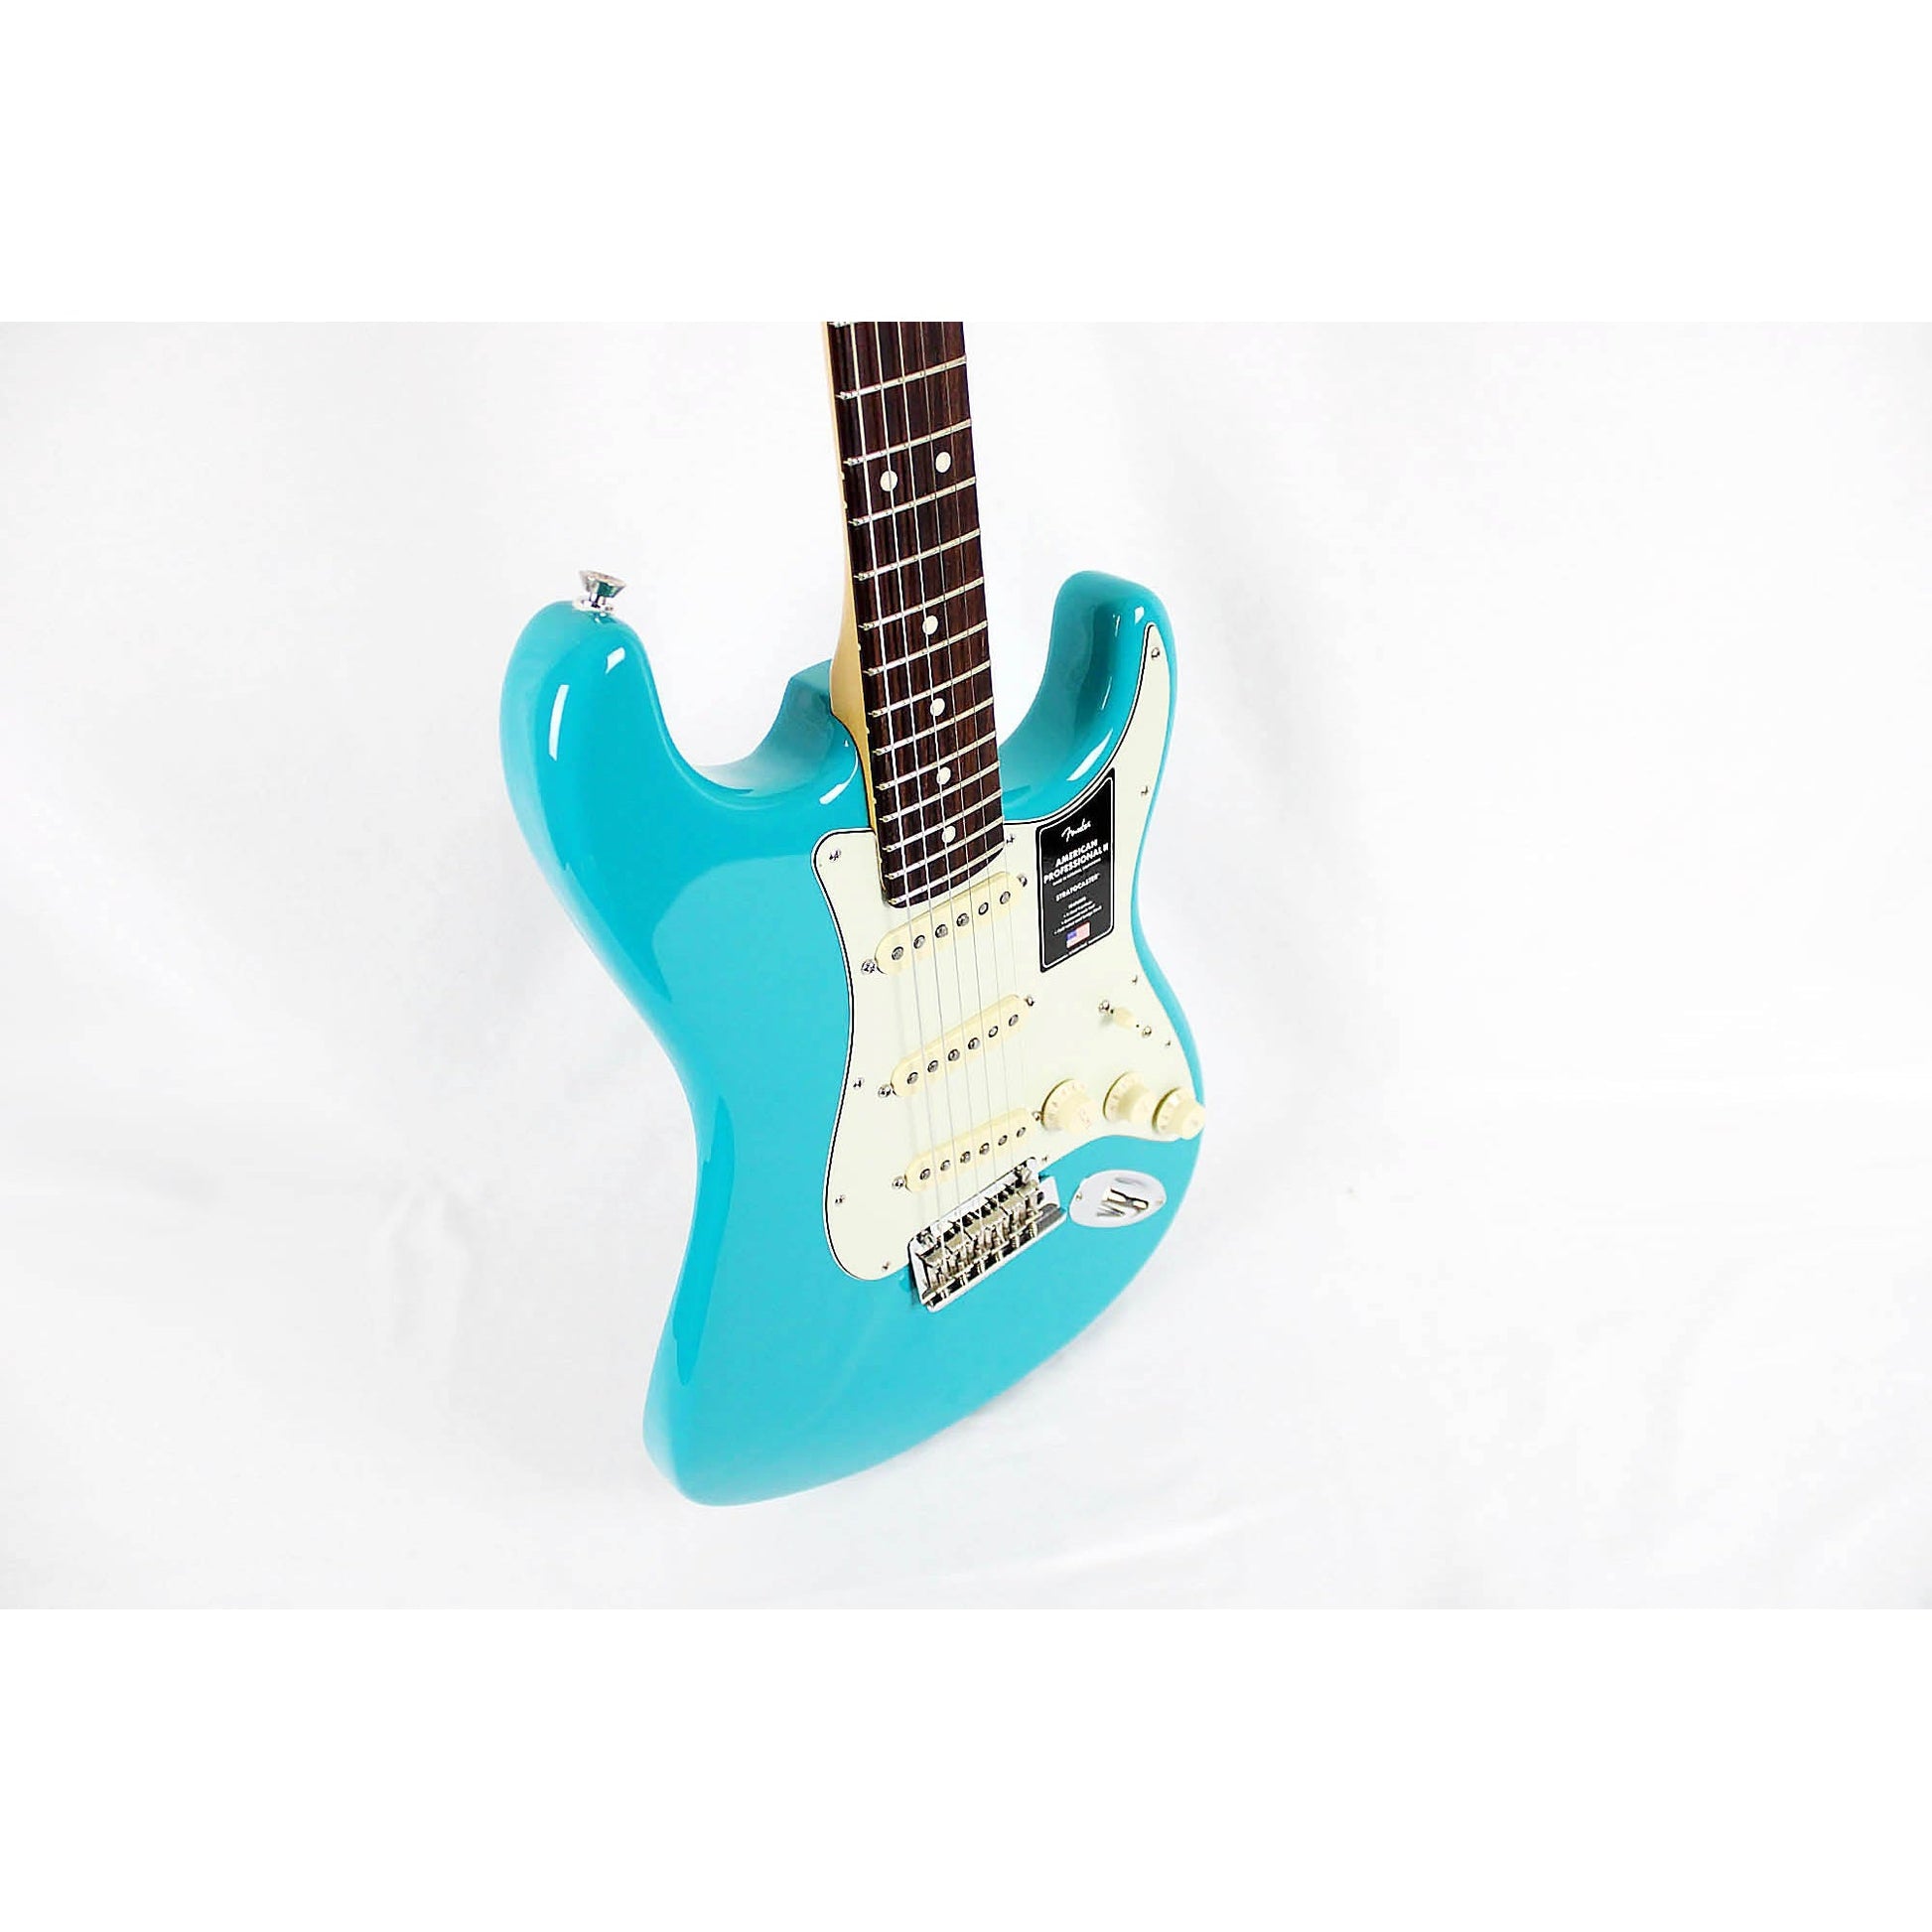 Fender American Professional II Stratocaster - Miami Blue with Rosewood Fingerboard - Leitz Music-885978577583-0113900719